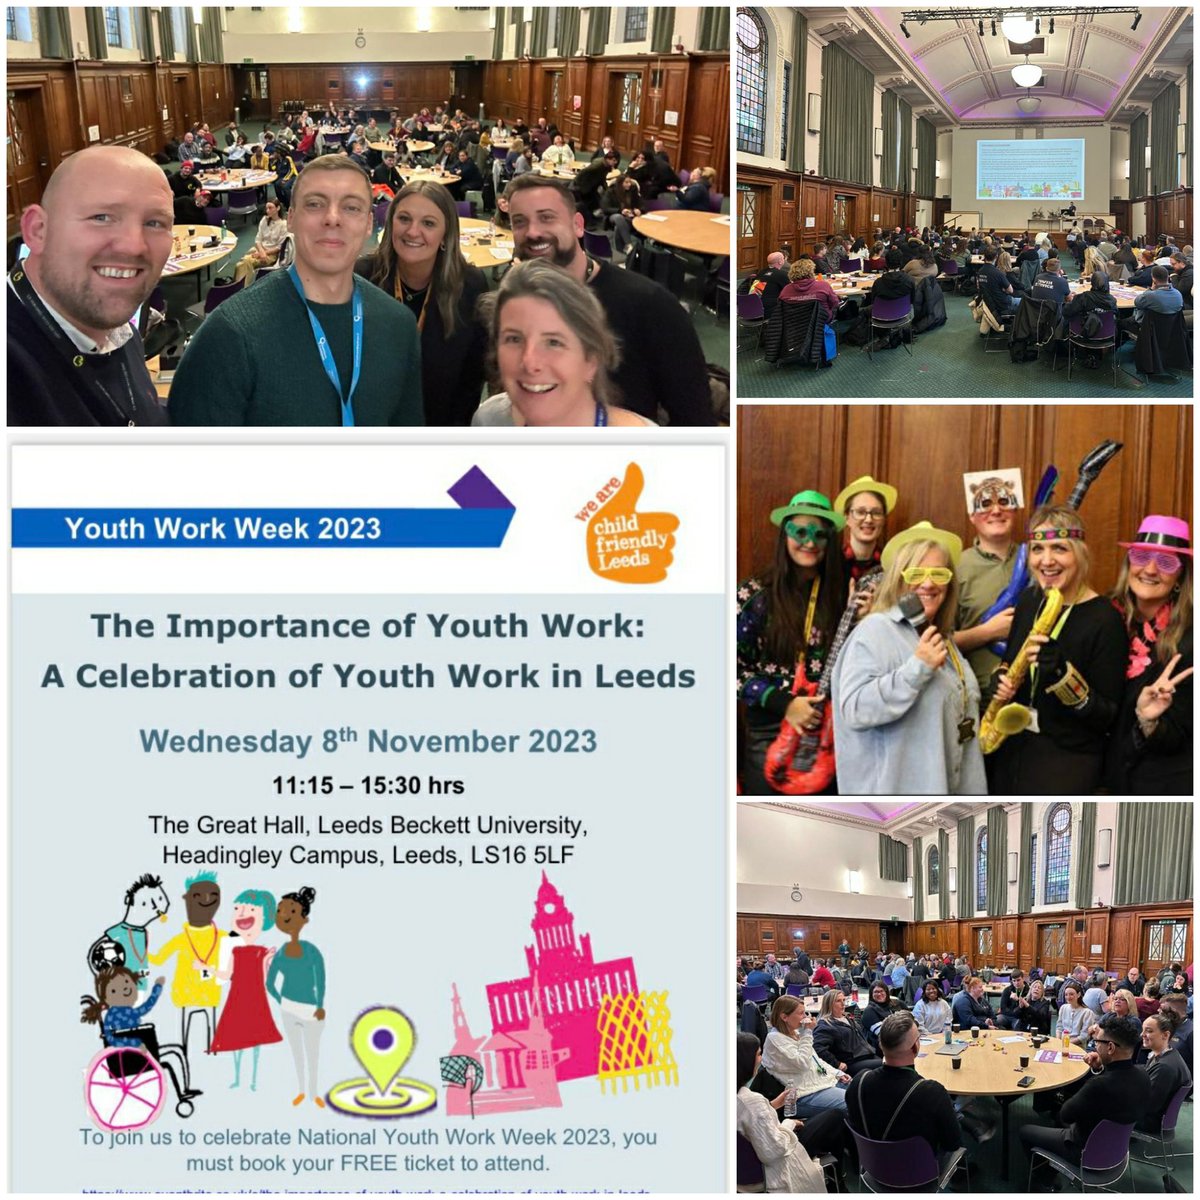 What a day!!

#amazing to get so many #Youthworkers & supporters of #Youthwork together as part of #Youthworkweek2023 @leedsbeckett

#YouthworkWorks
#LeedsYouthService 
#LeedsYouthAlliance 
#Partnership